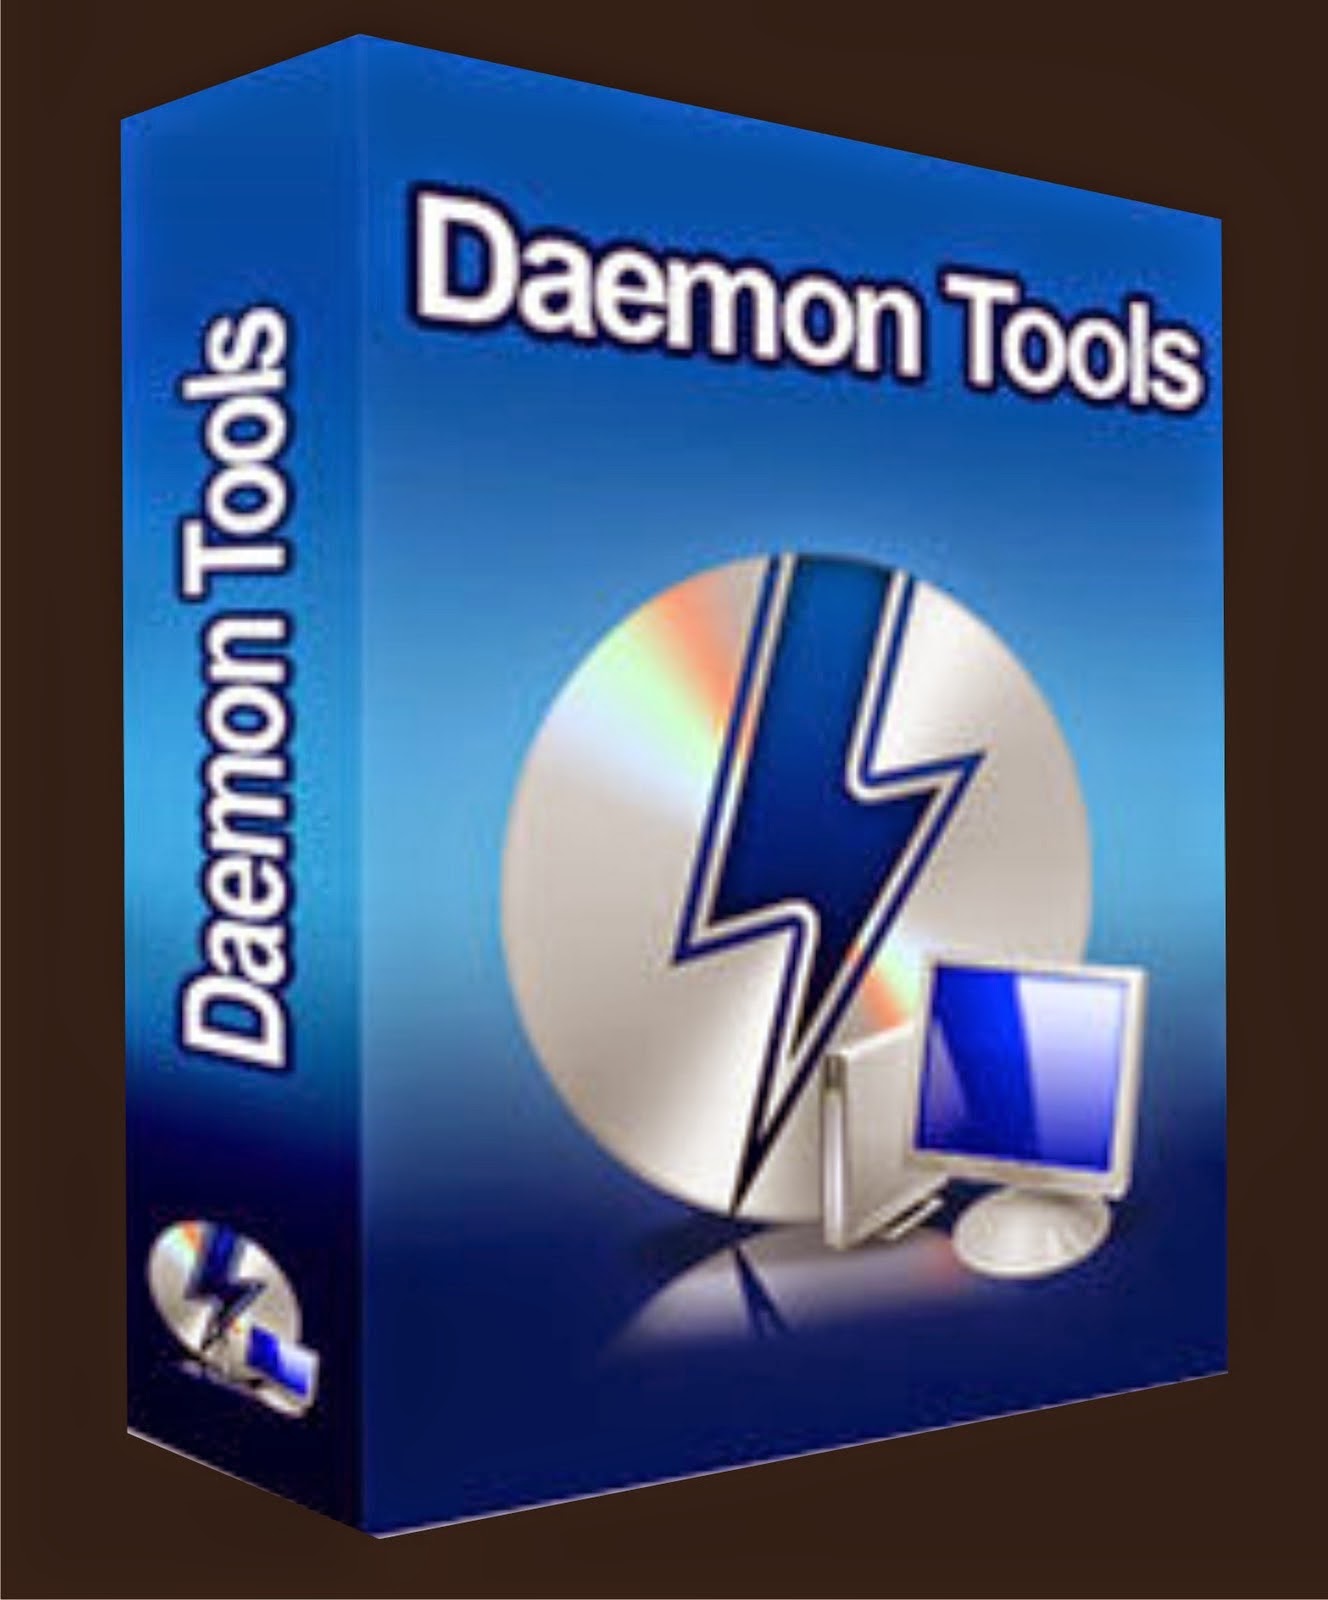 daemon tools software free download for windows 8